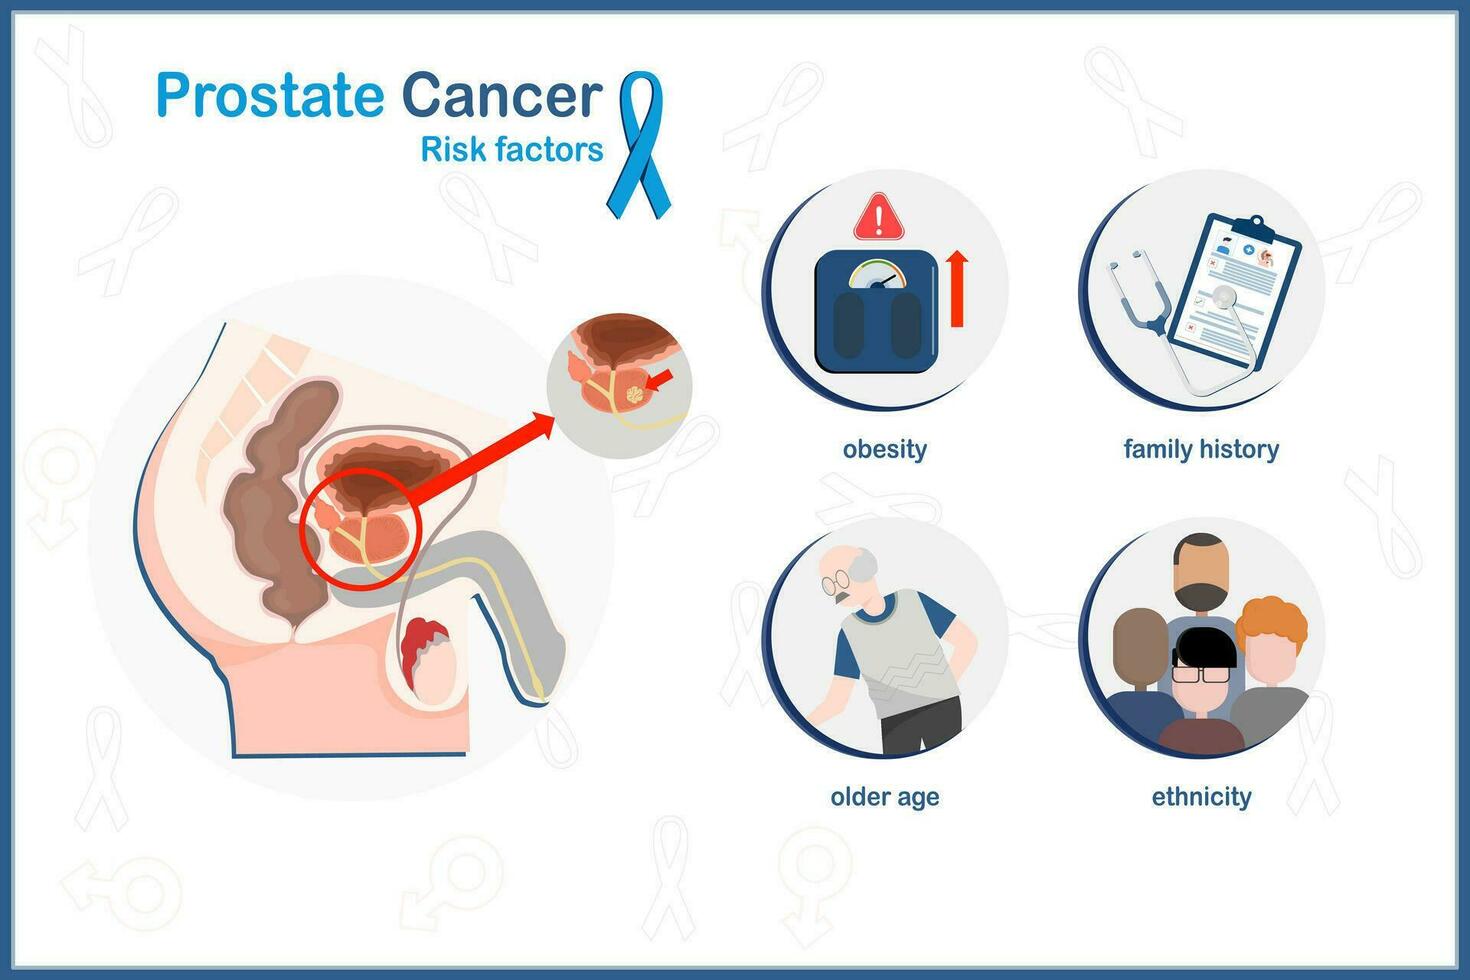 Vector medical illustration in flat style, concept of prostate cancer, prostate cancer risk factors, including elderly, ethnicity, family history,obesity.isolated on white background.